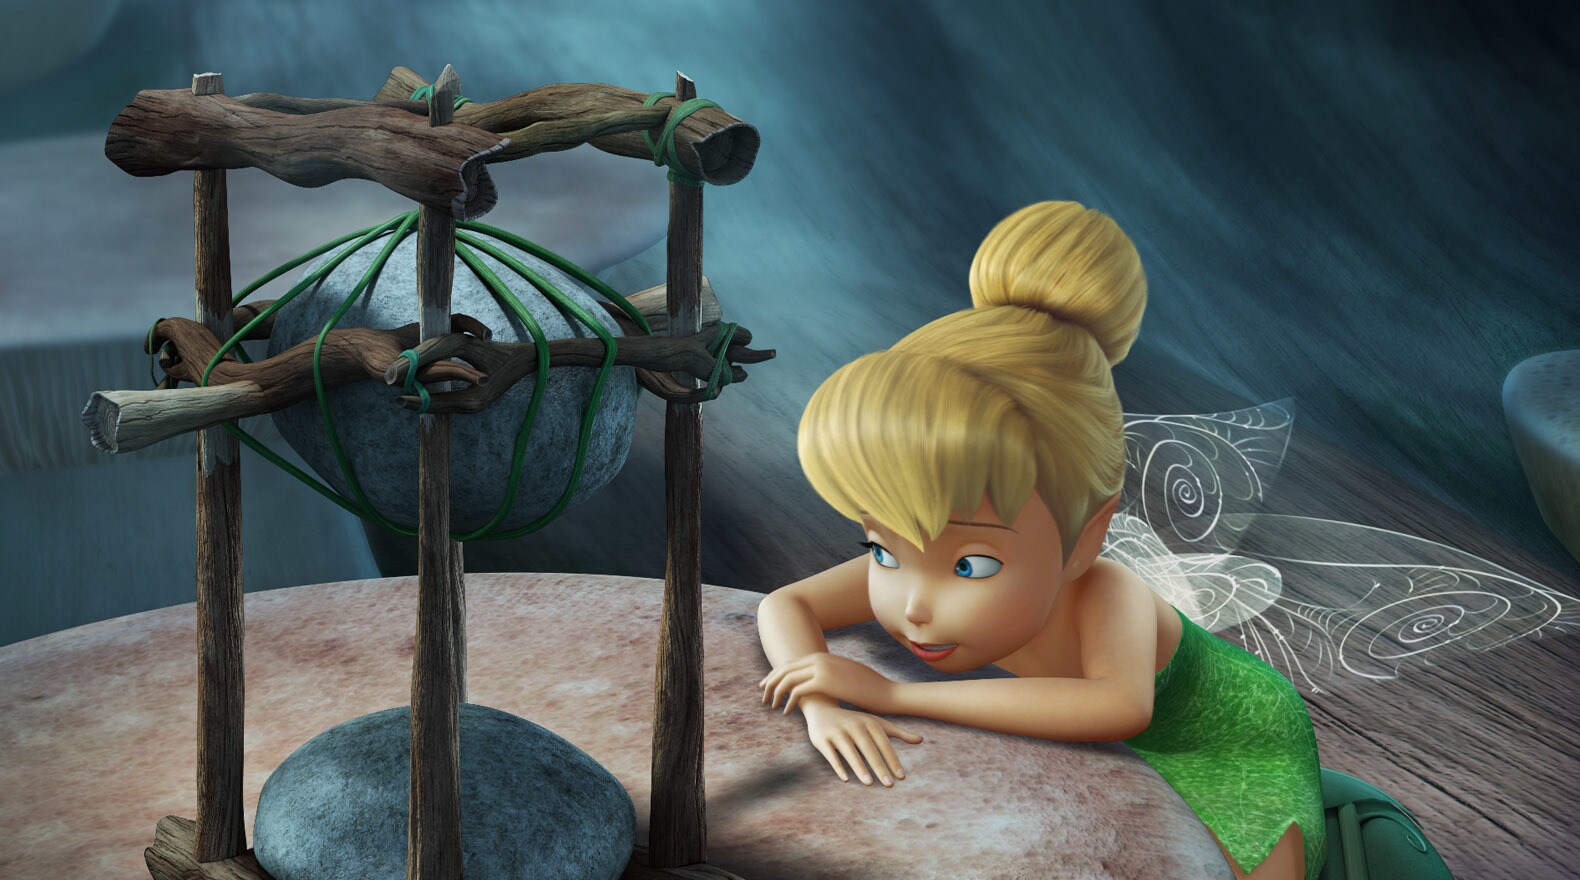 It doesn't take long for Tink to come up with a good idea.